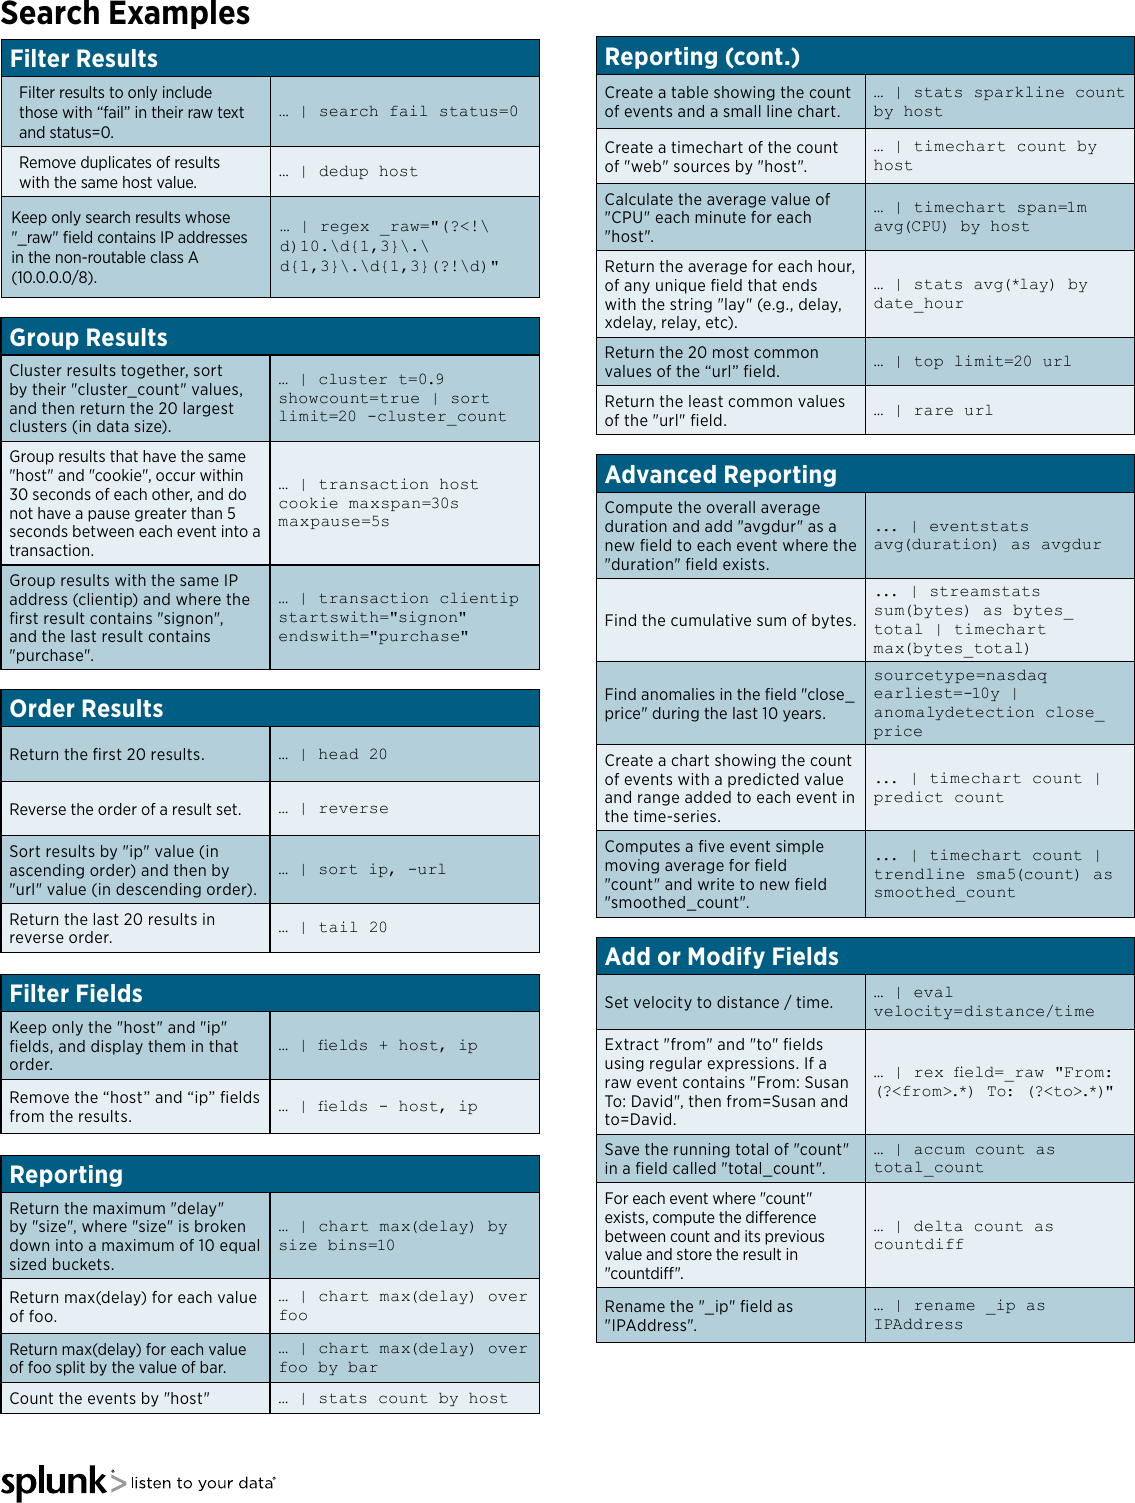 Page 5 of 6 - Splunk Quick Reference Guide